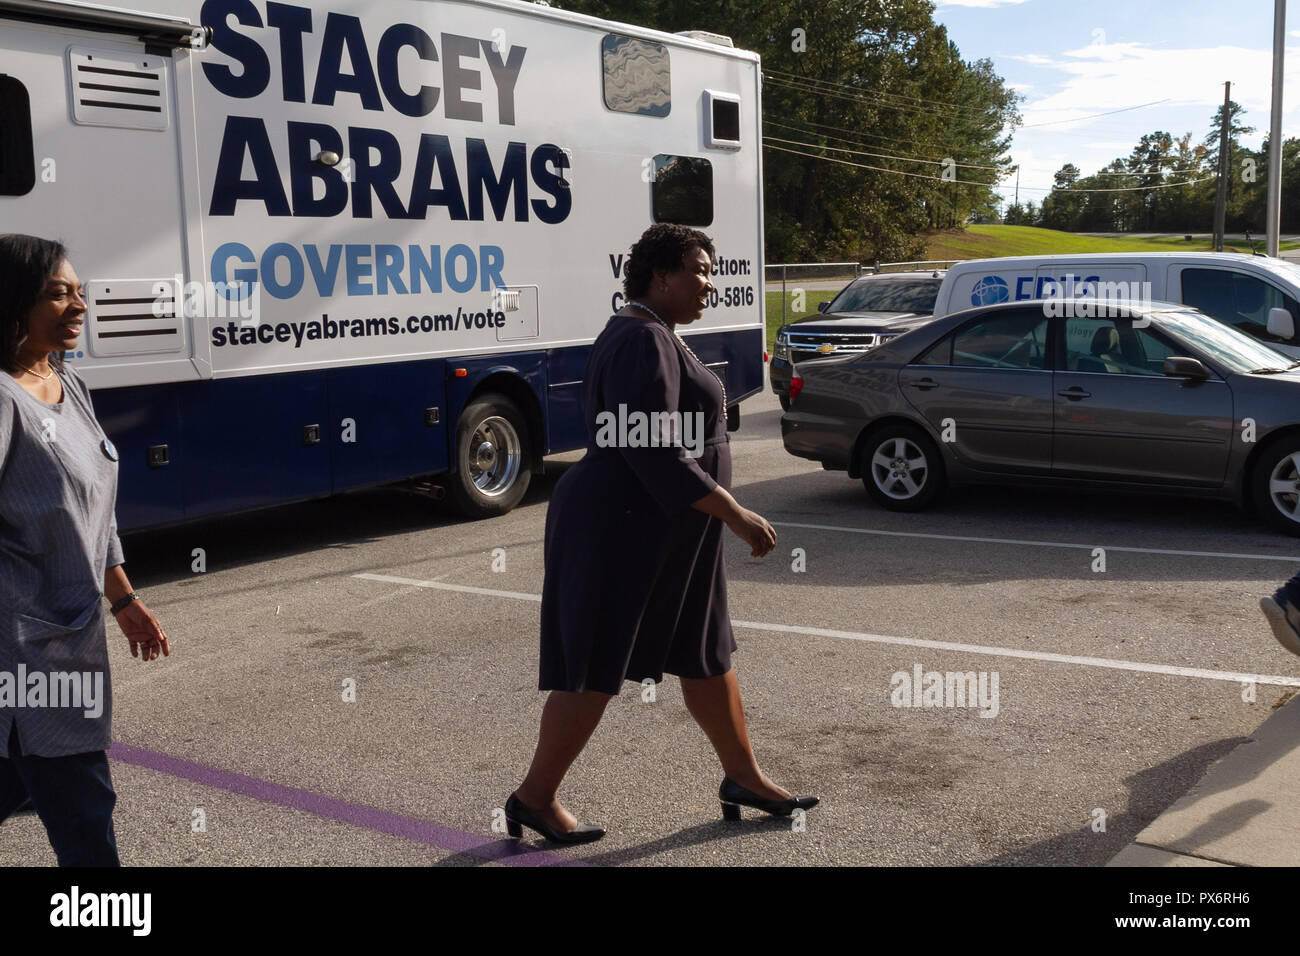 Stacey Abrams on her Get Out the Vote tour of Georgia before the Georgia Governor's election in 2018. Stock Photo